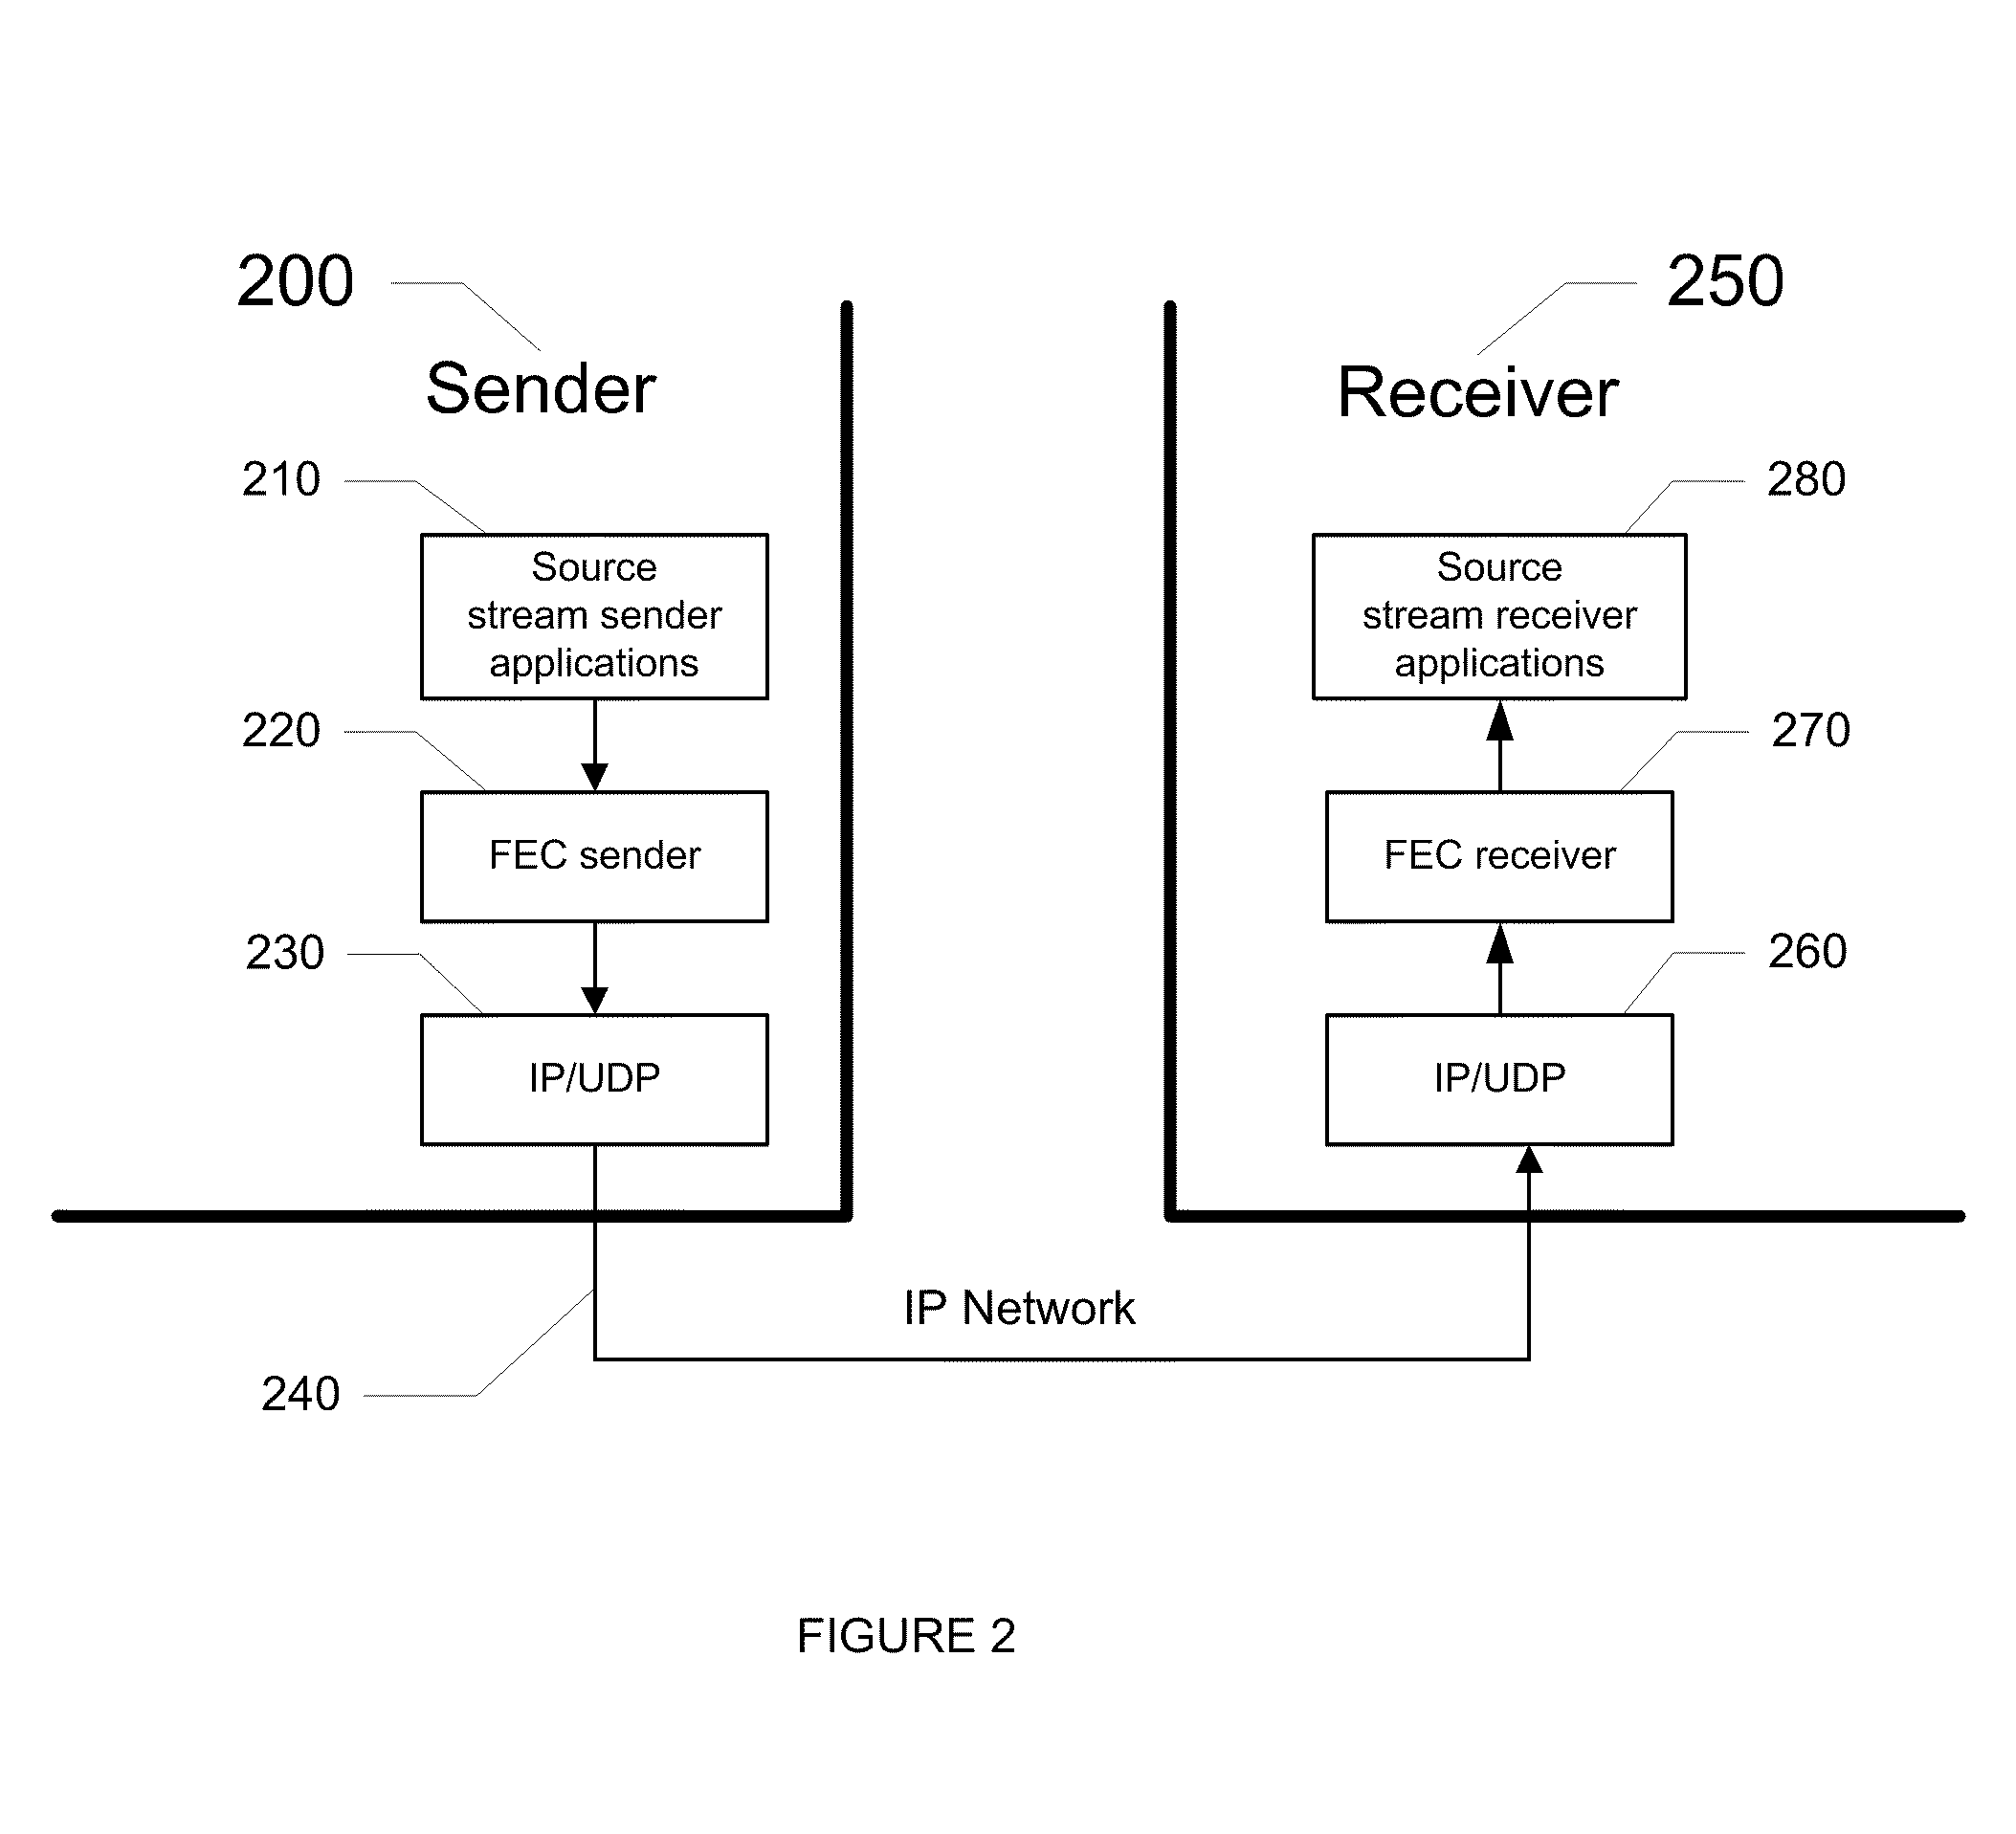 Fec architecture for streaming services including symbol based operations and packet tagging